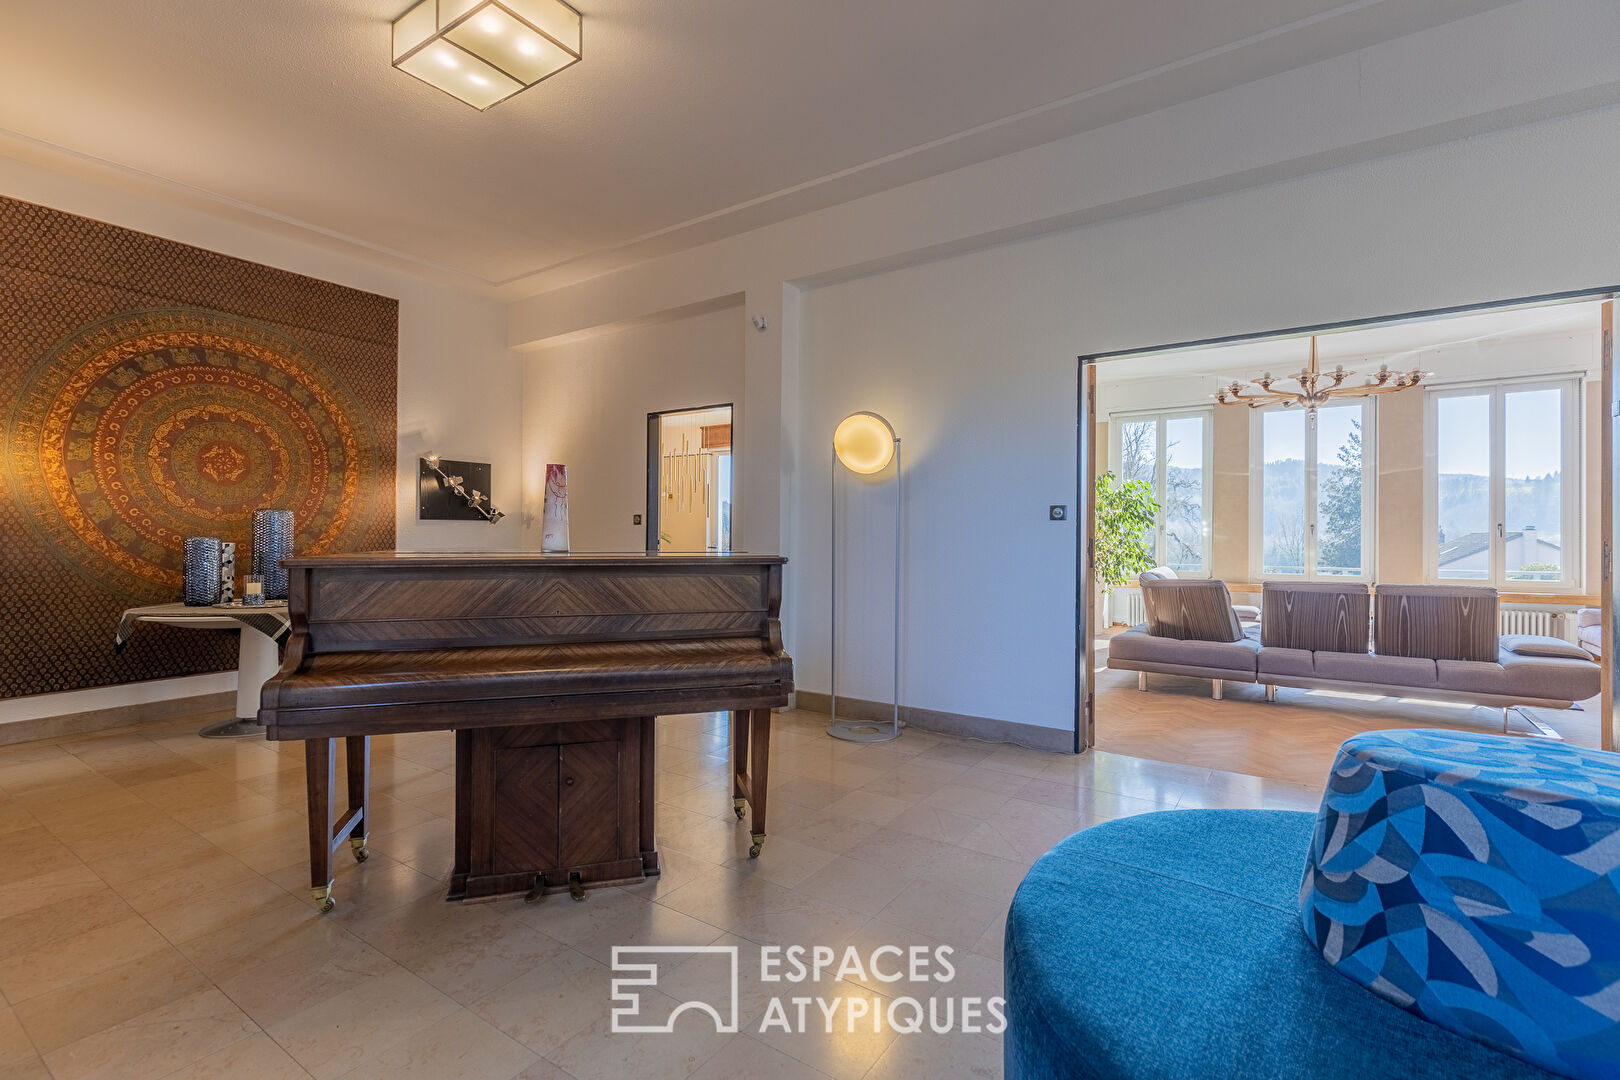 Villa from the 1930s completely renovated